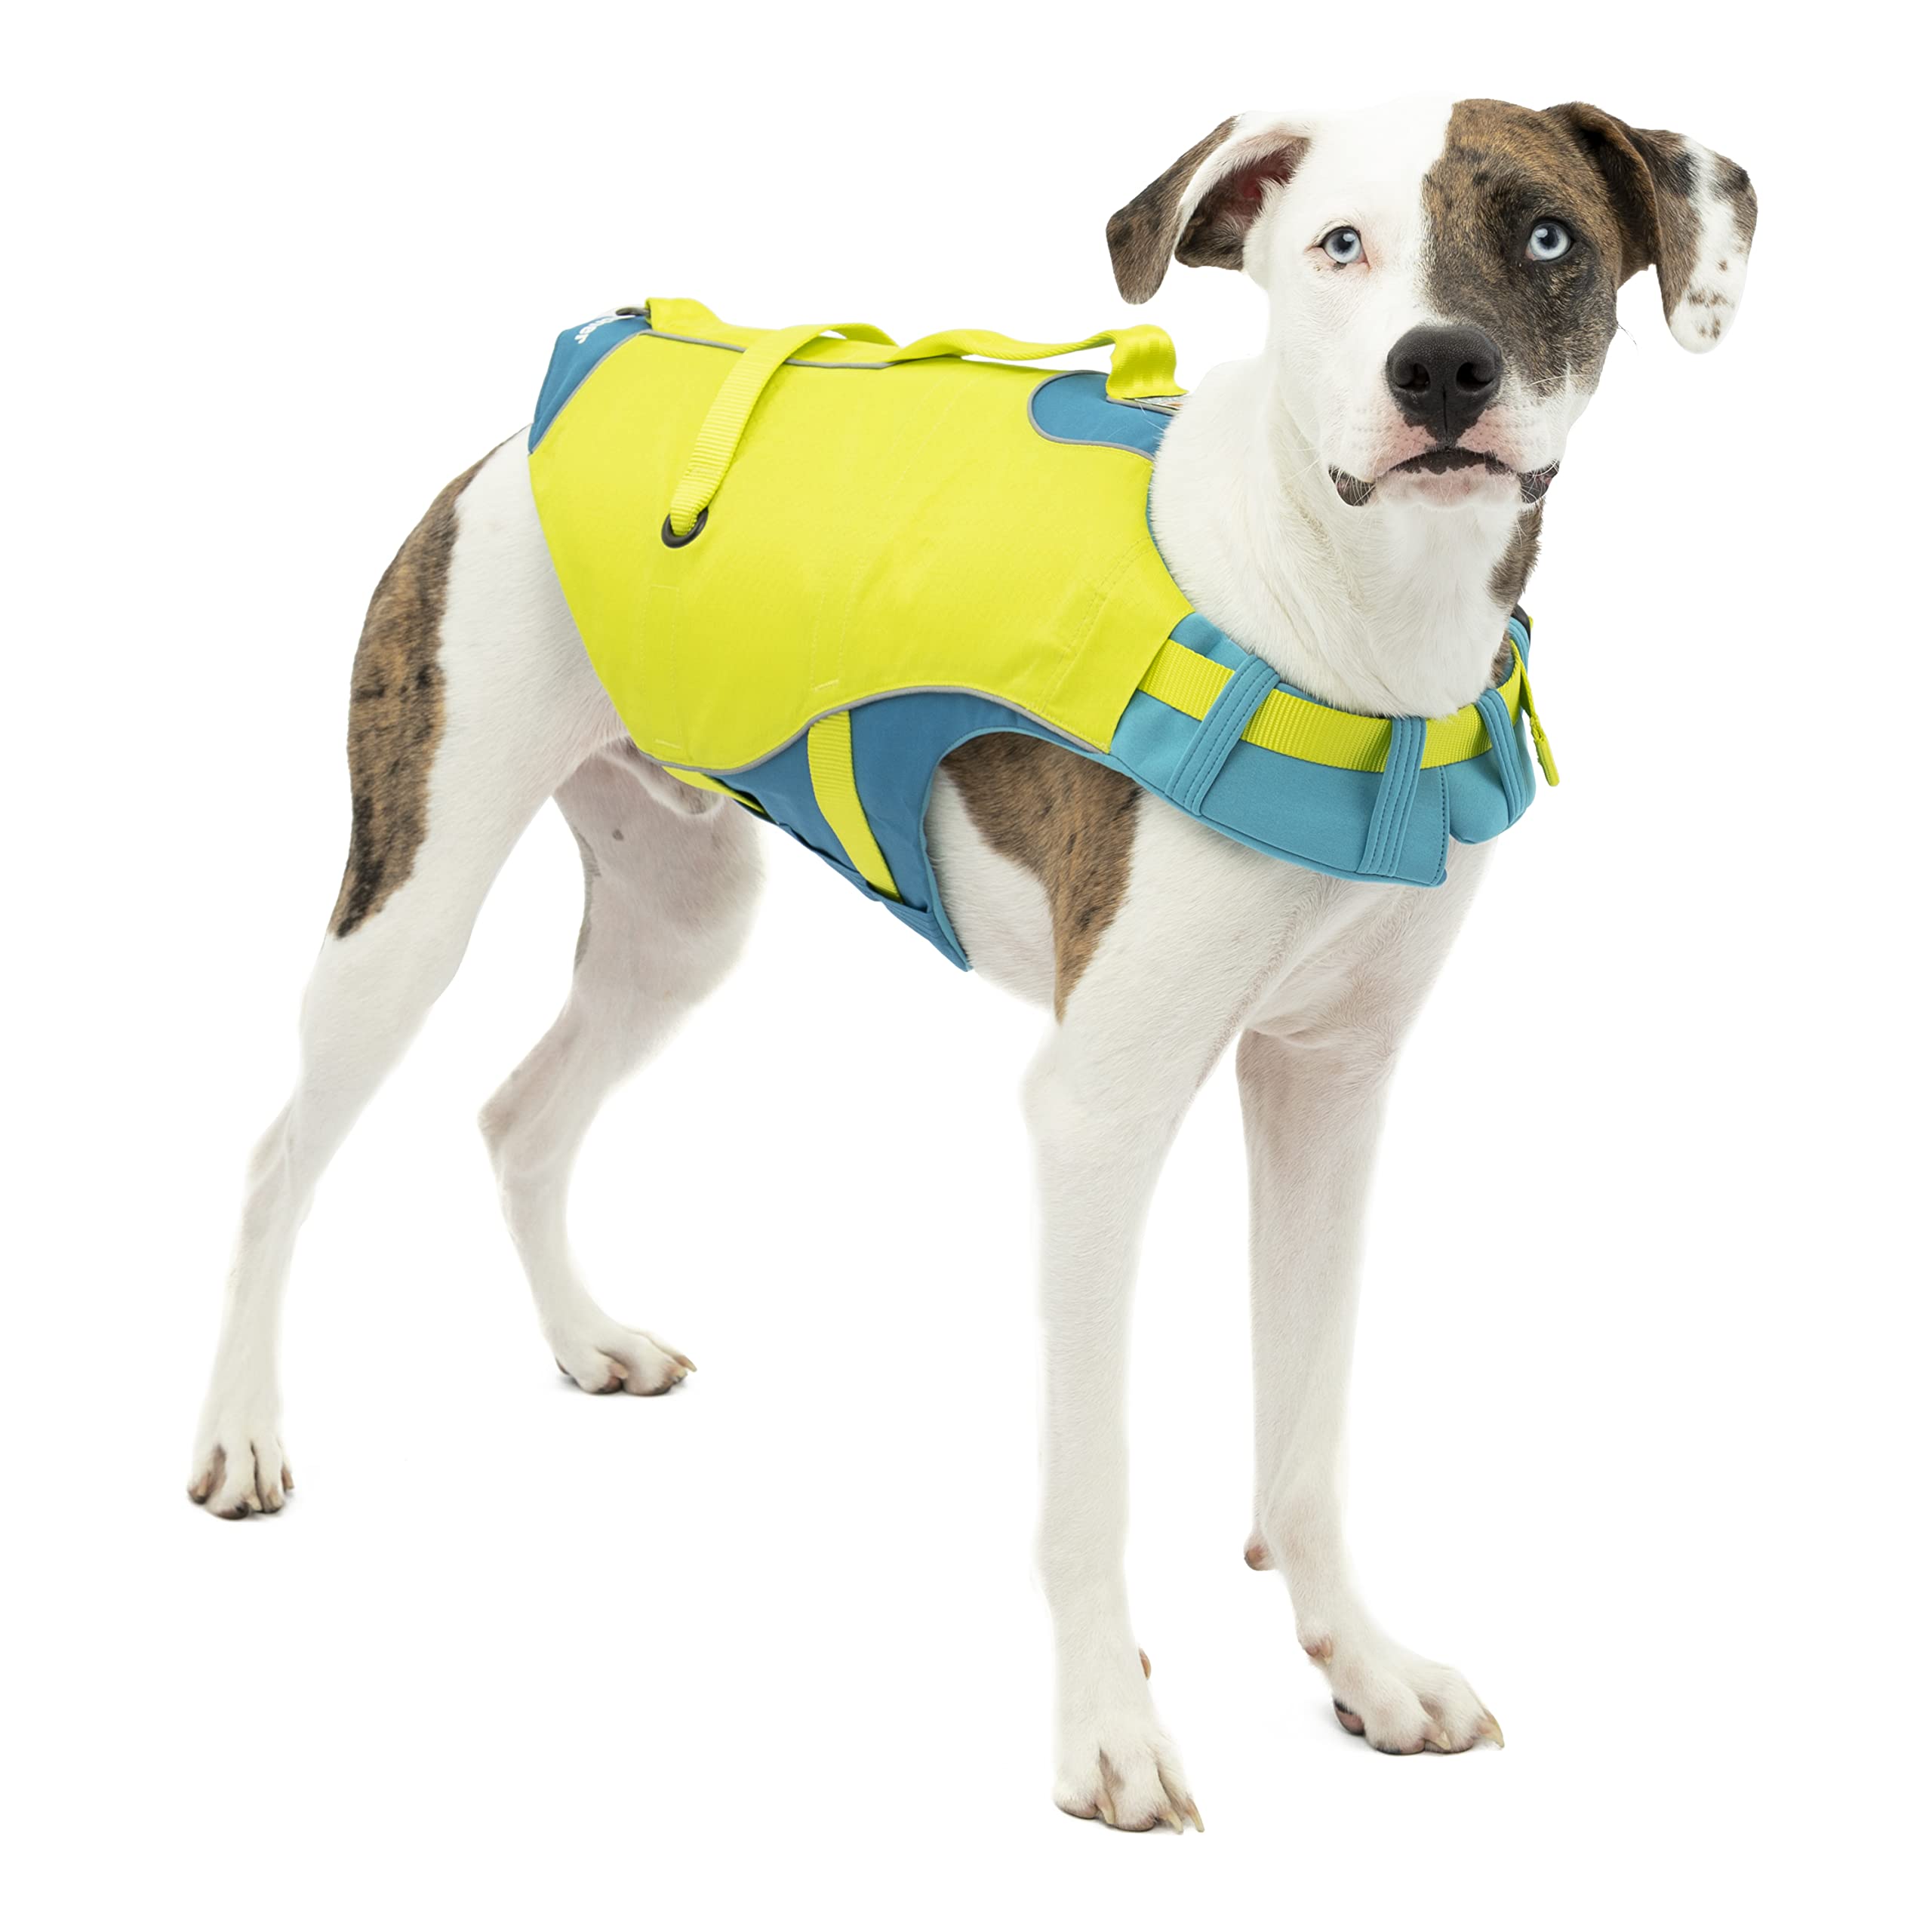 Kurgo Surf n’ Turf Dog Life Jacket - Flotation Life Vest for Swimming and Boating - Dog Lifejacket with Rescue Handle and Reflective Accents - Machine Washable - Blue/Green, Large